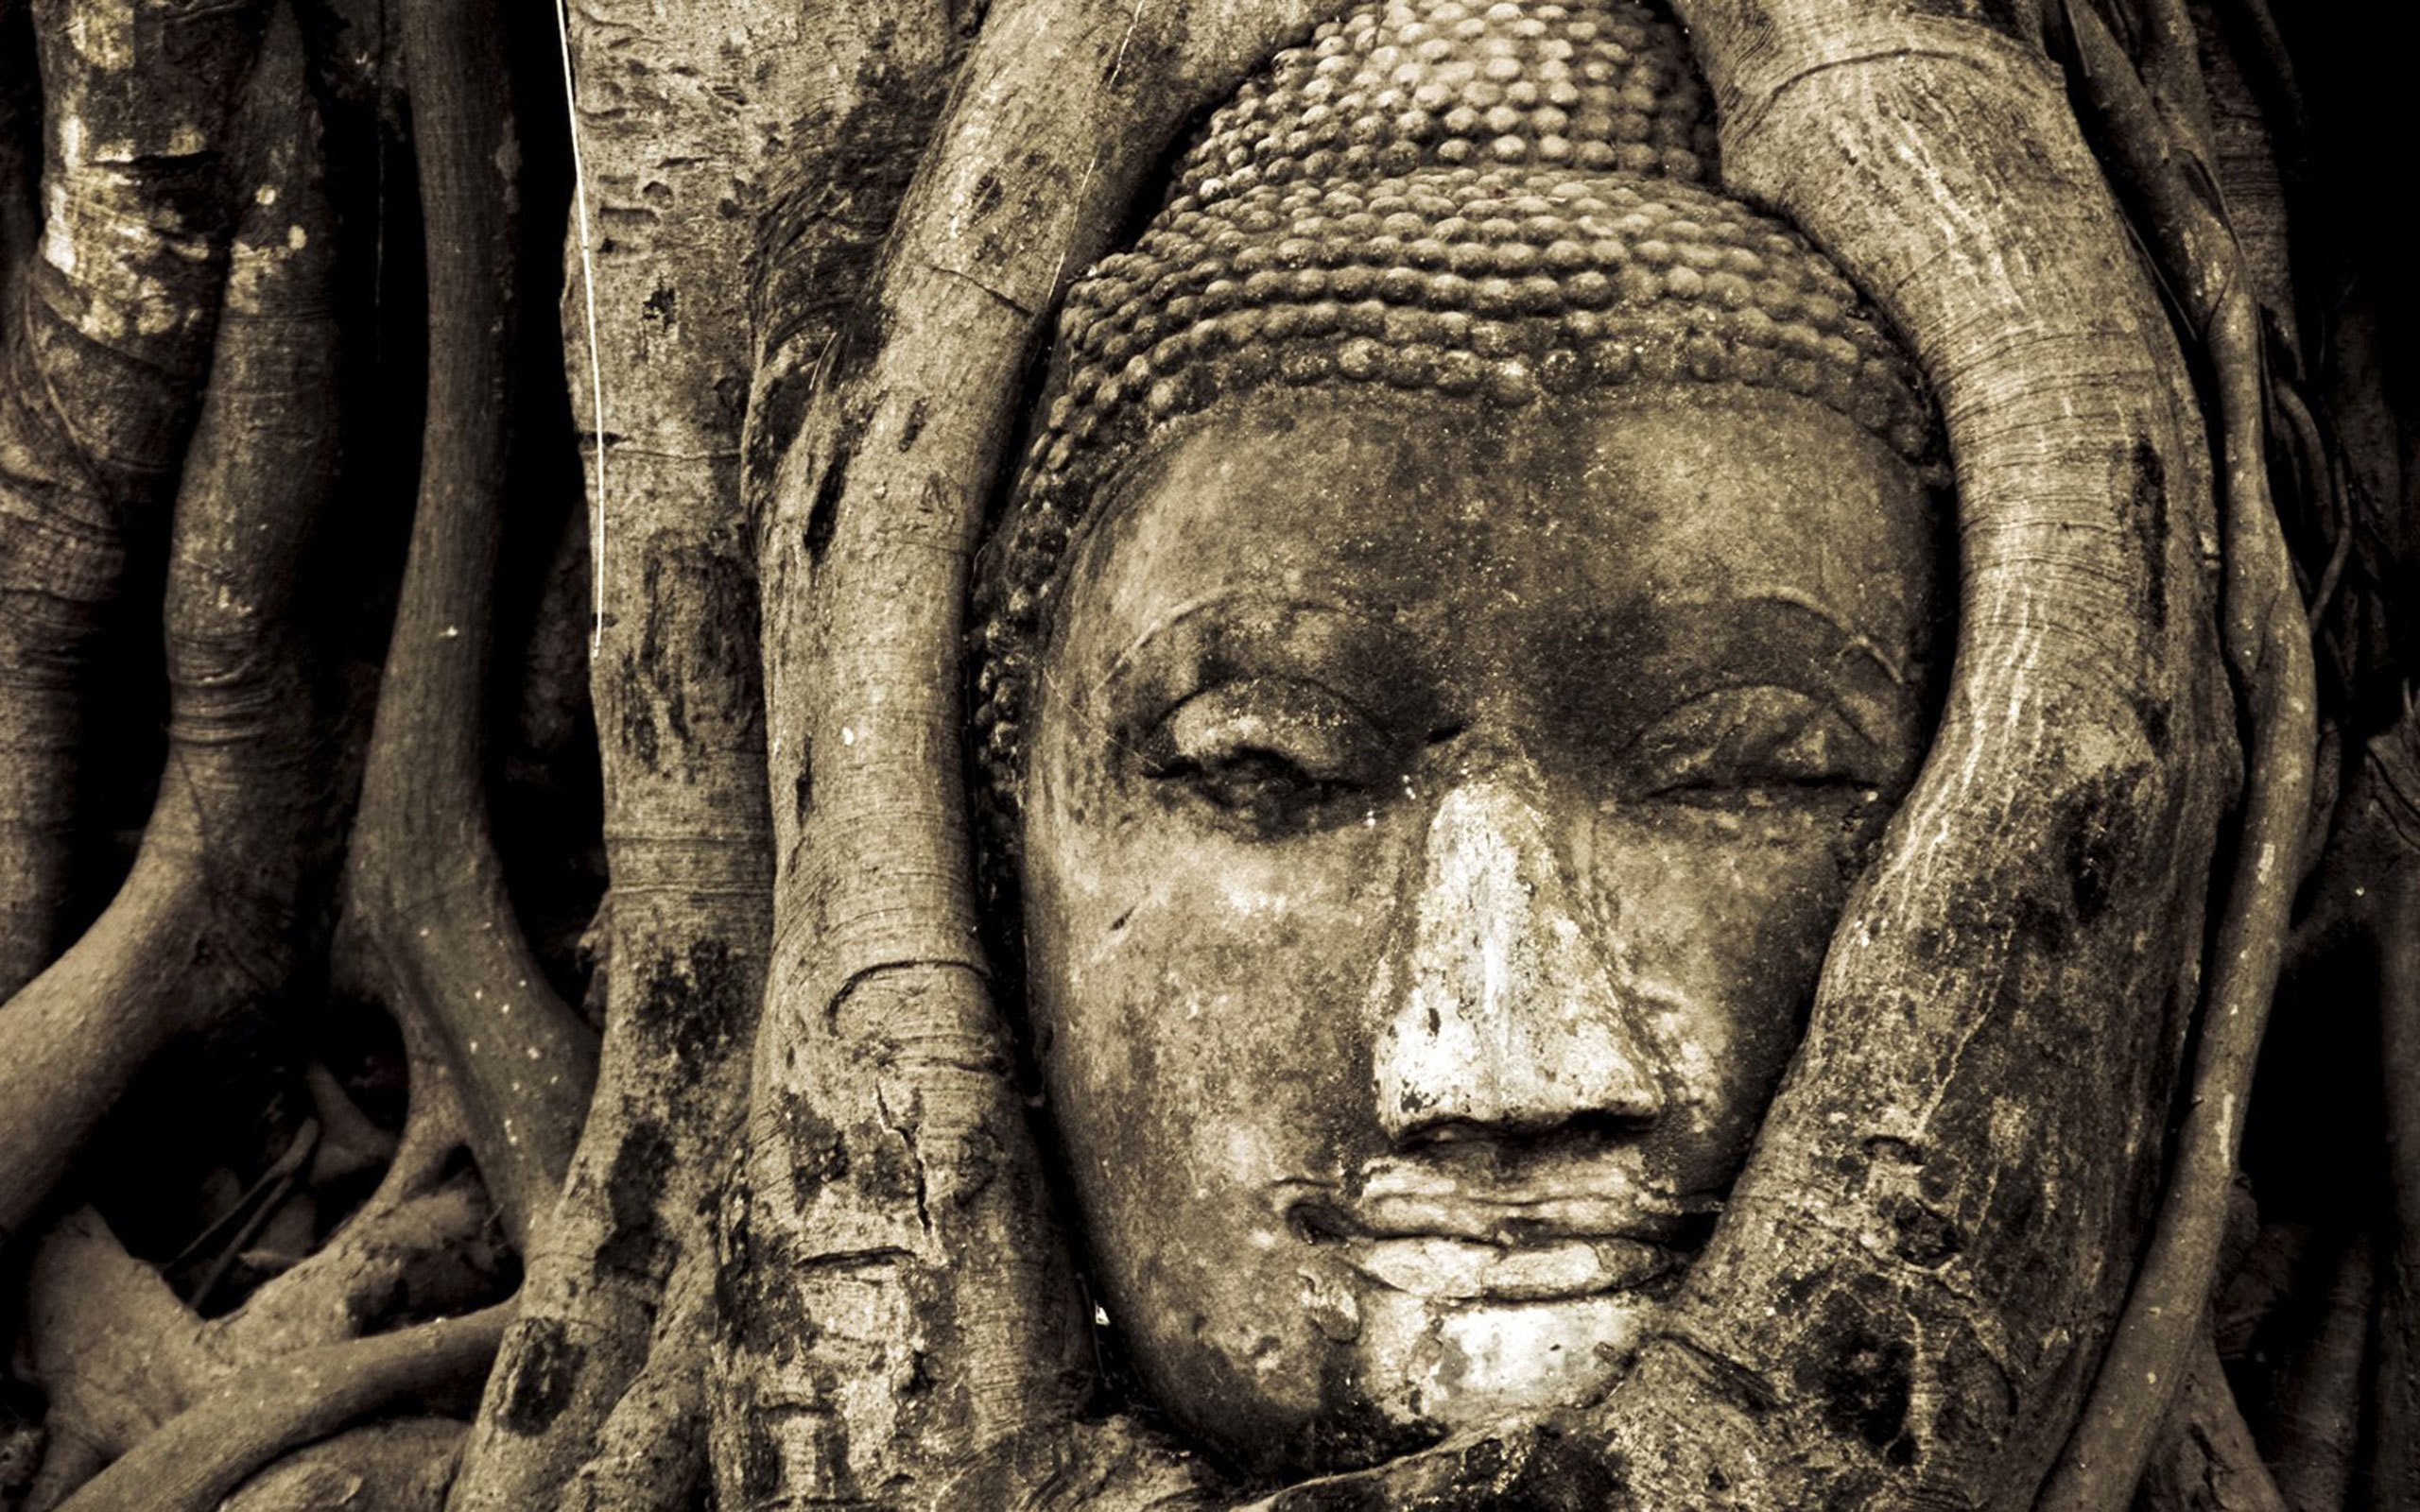 Buddha, Nature, Trees, Branch, Buddhism, Thailand, Monochrome, Sepia, Sculpture, National Geographic Wallpaper